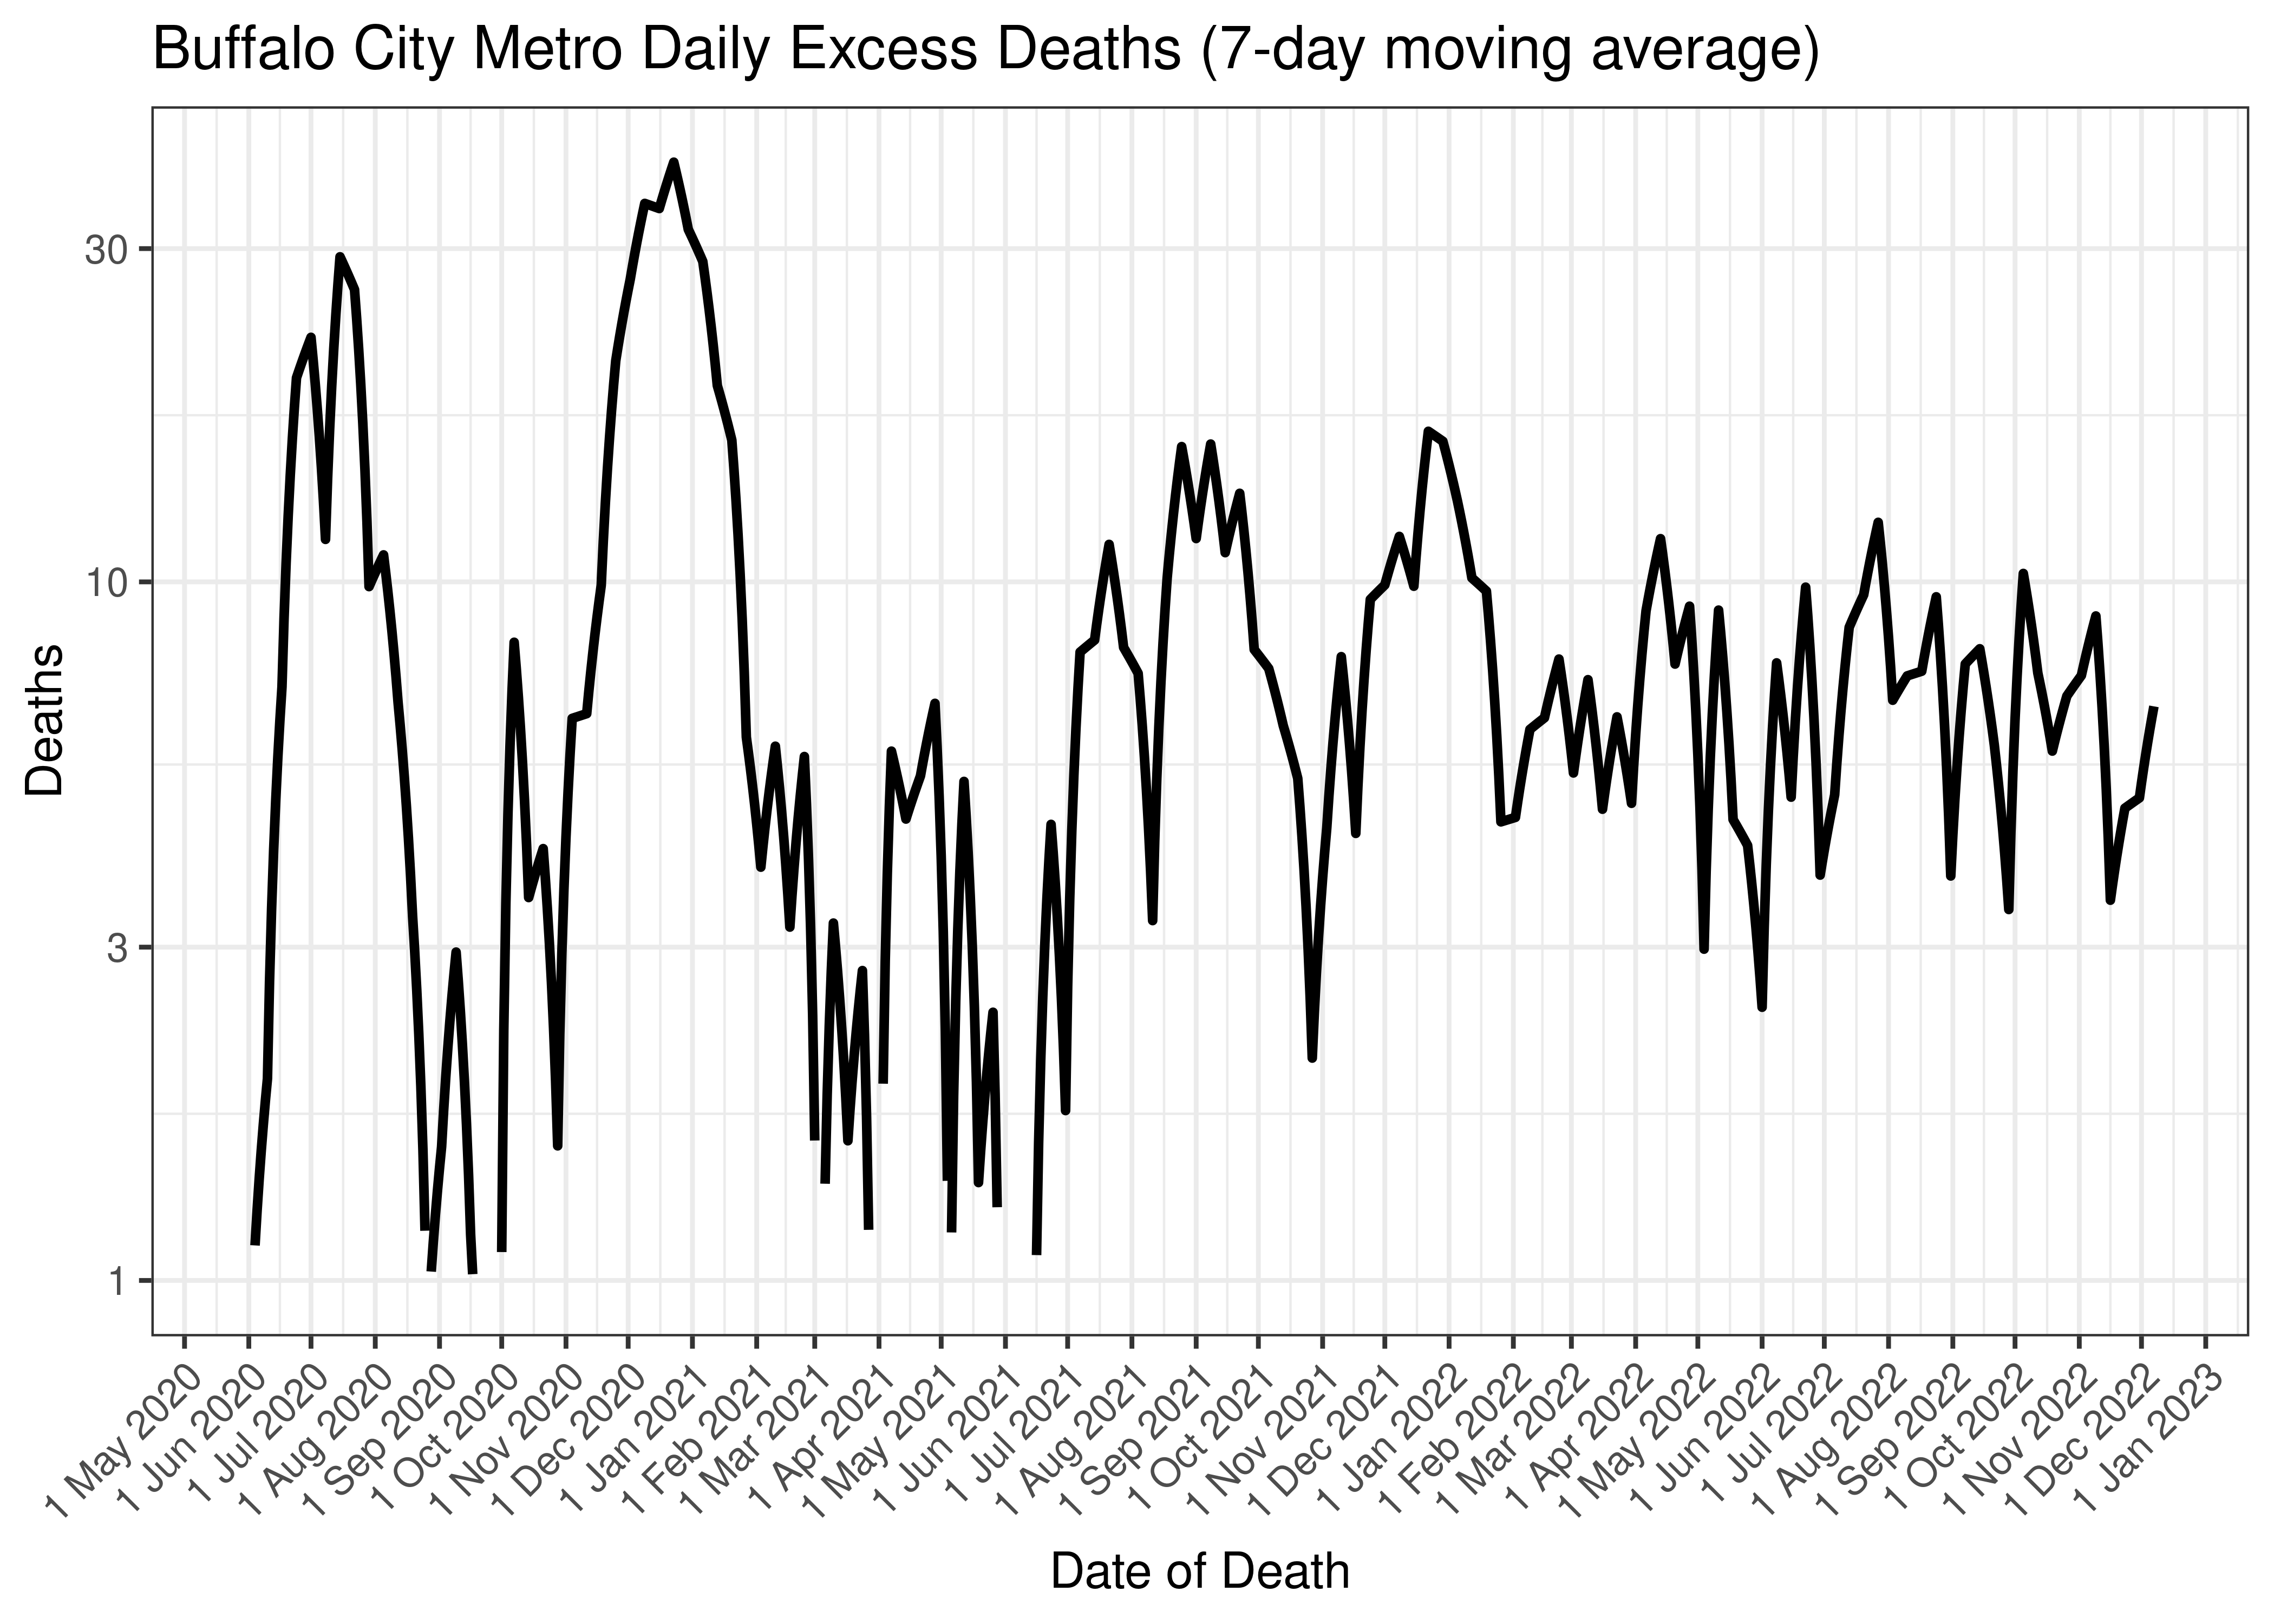 Buffalo City Metro Daily Excess Deaths (7-day moving average)